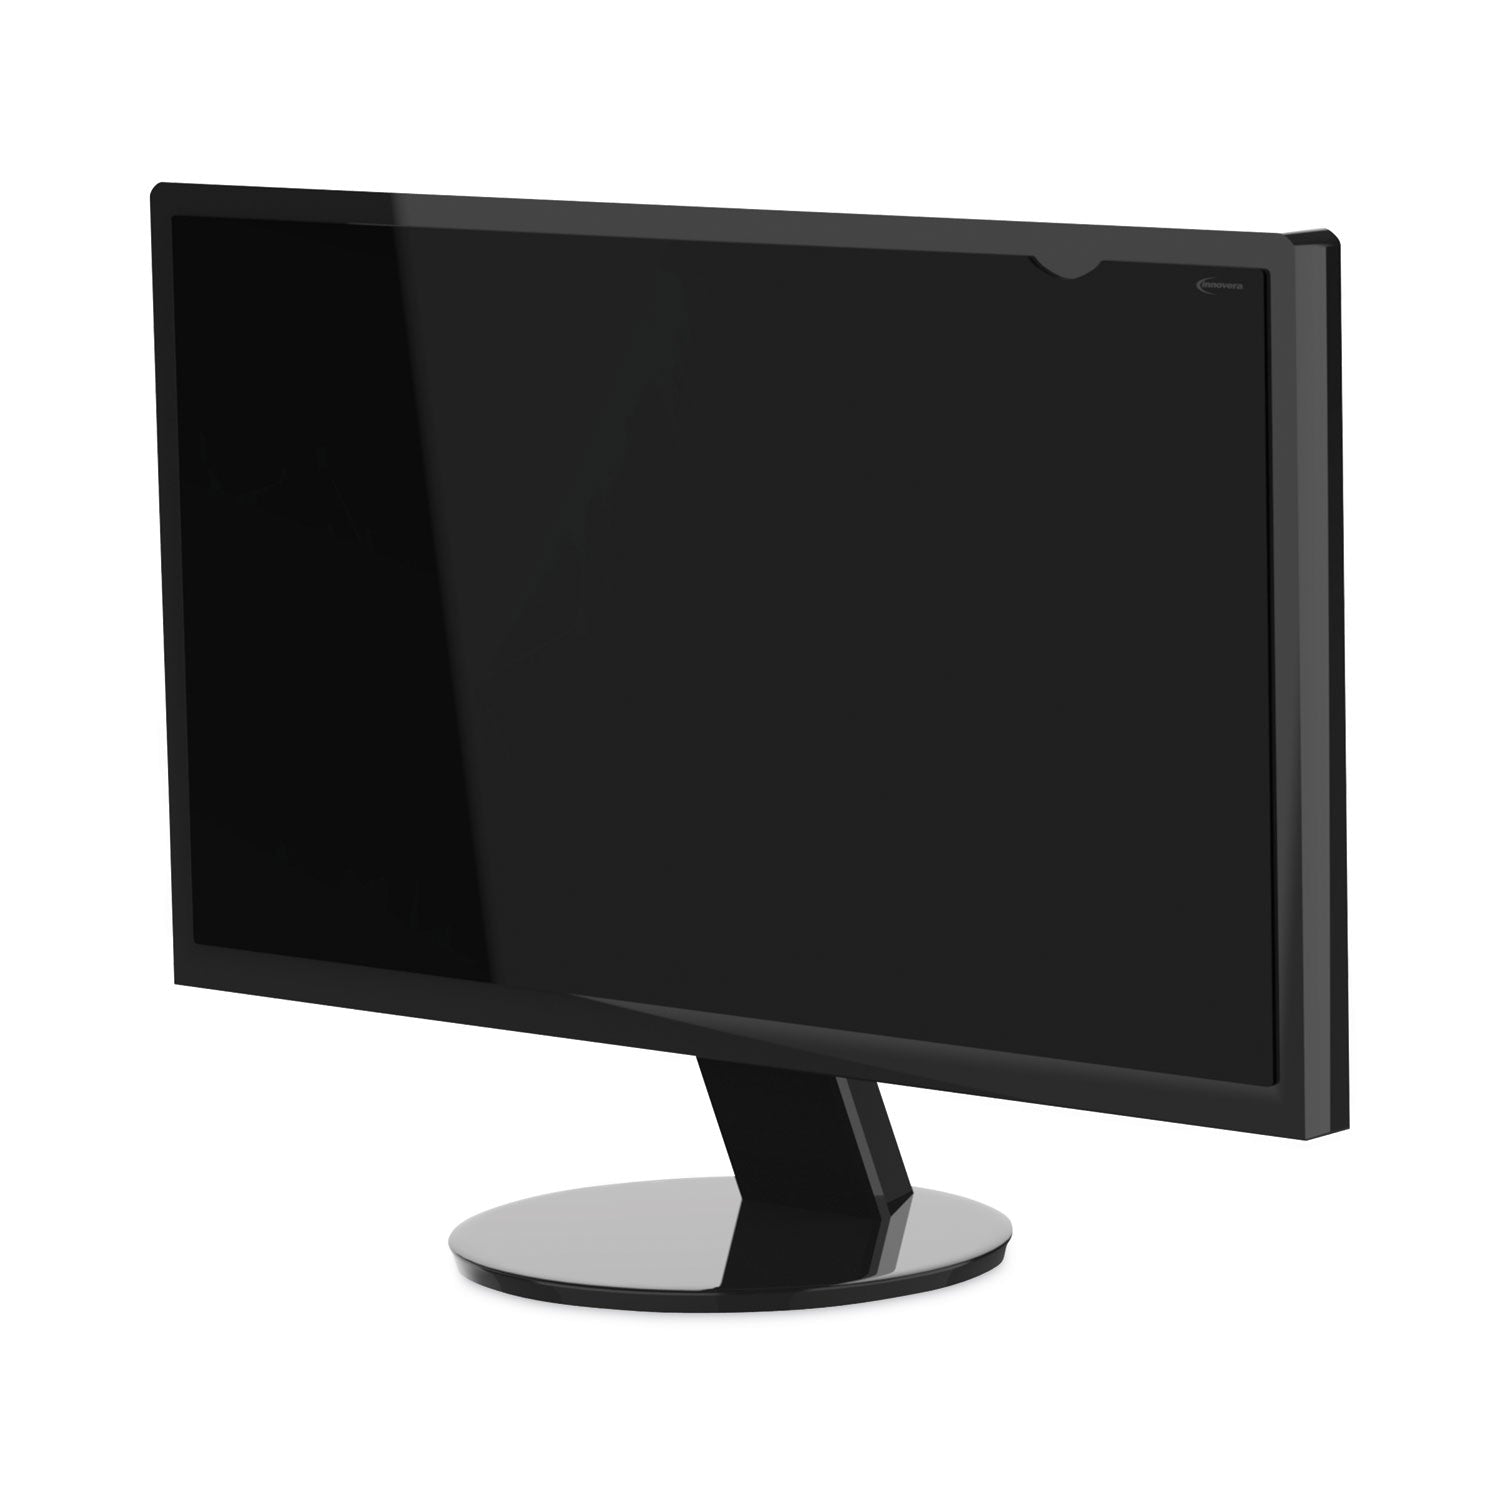 blackout-privacy-monitor-filter-for-195-widescreen-flat-panel-monitor-169-aspect-ratio_ivrblf195w - 5